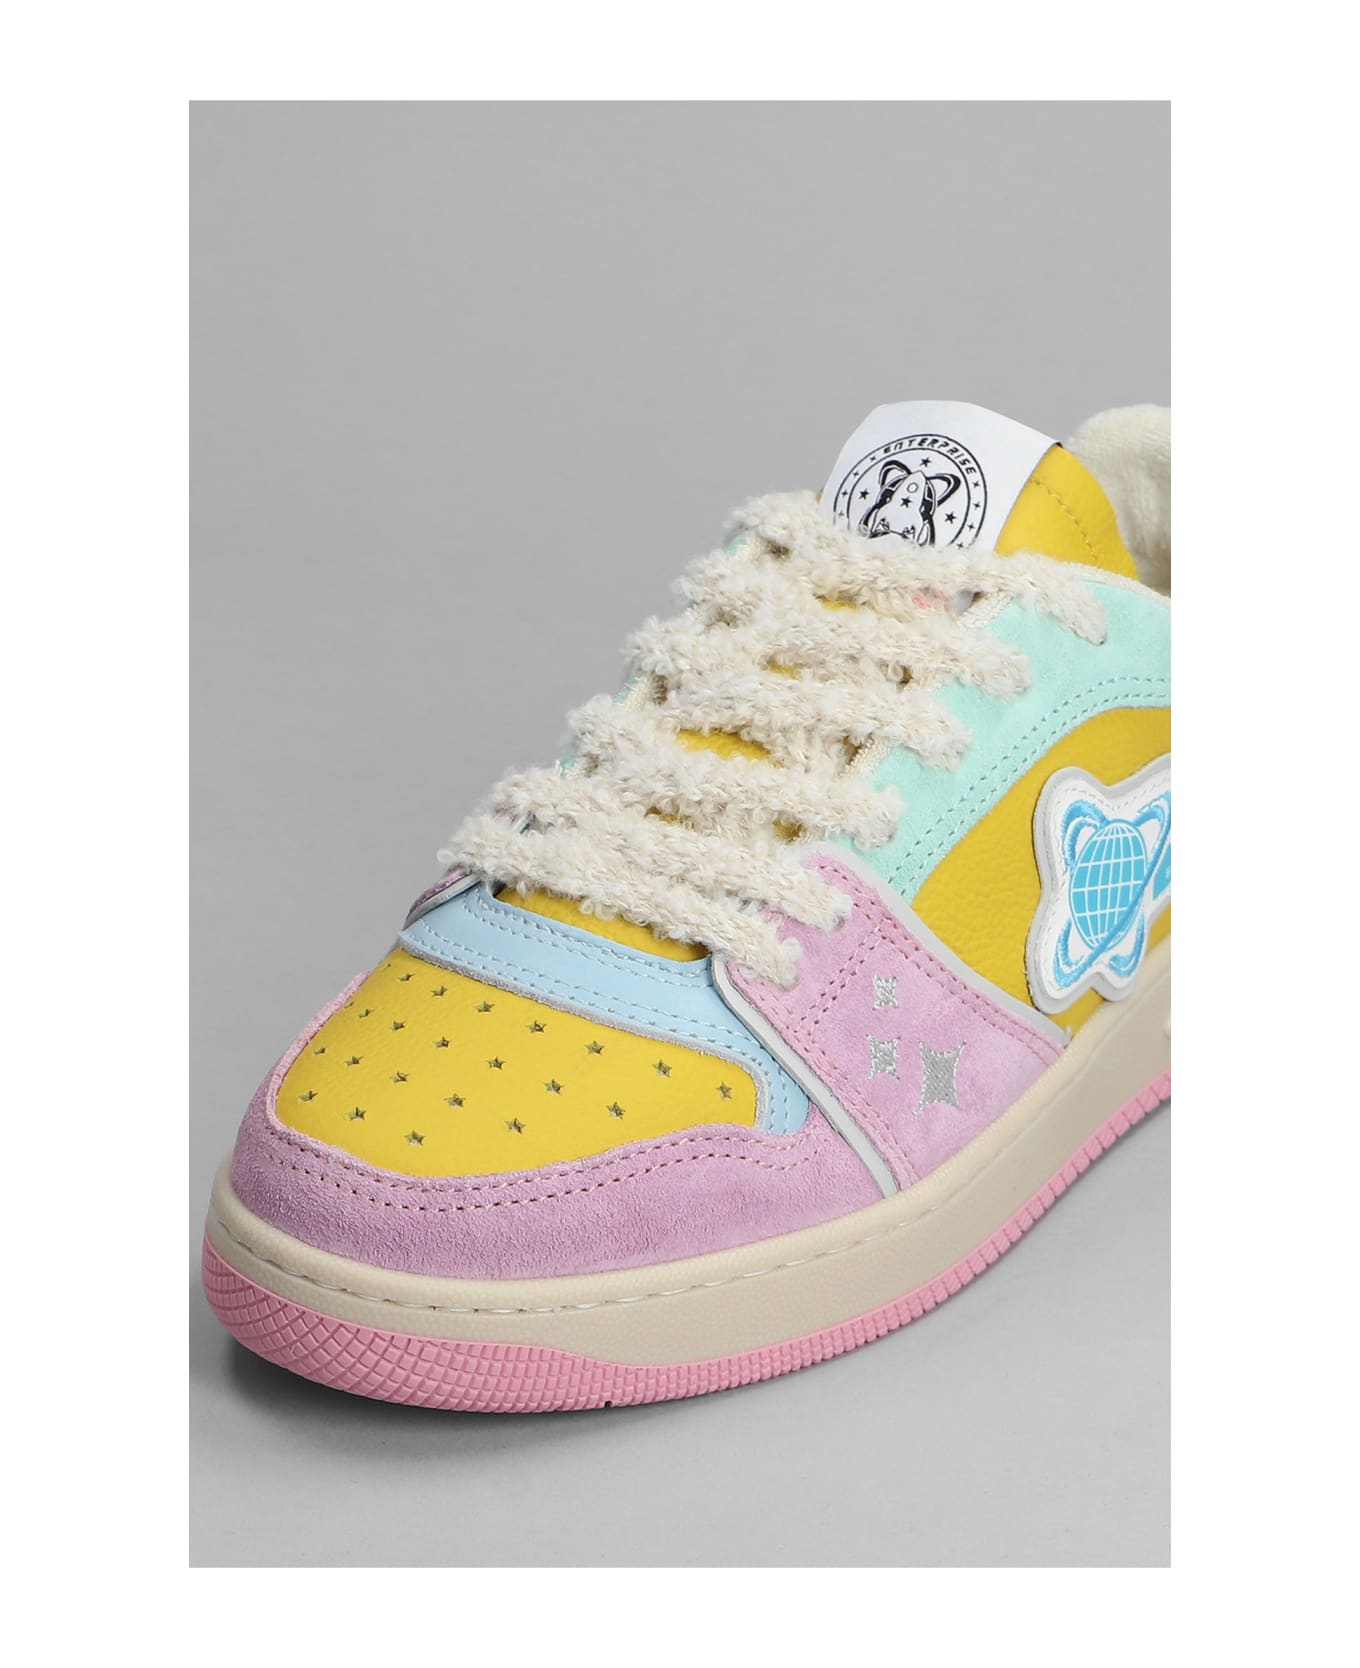 Enterprise Japan Sneakers In Rose-pink Suede And Leather - YELLOW/BLUE